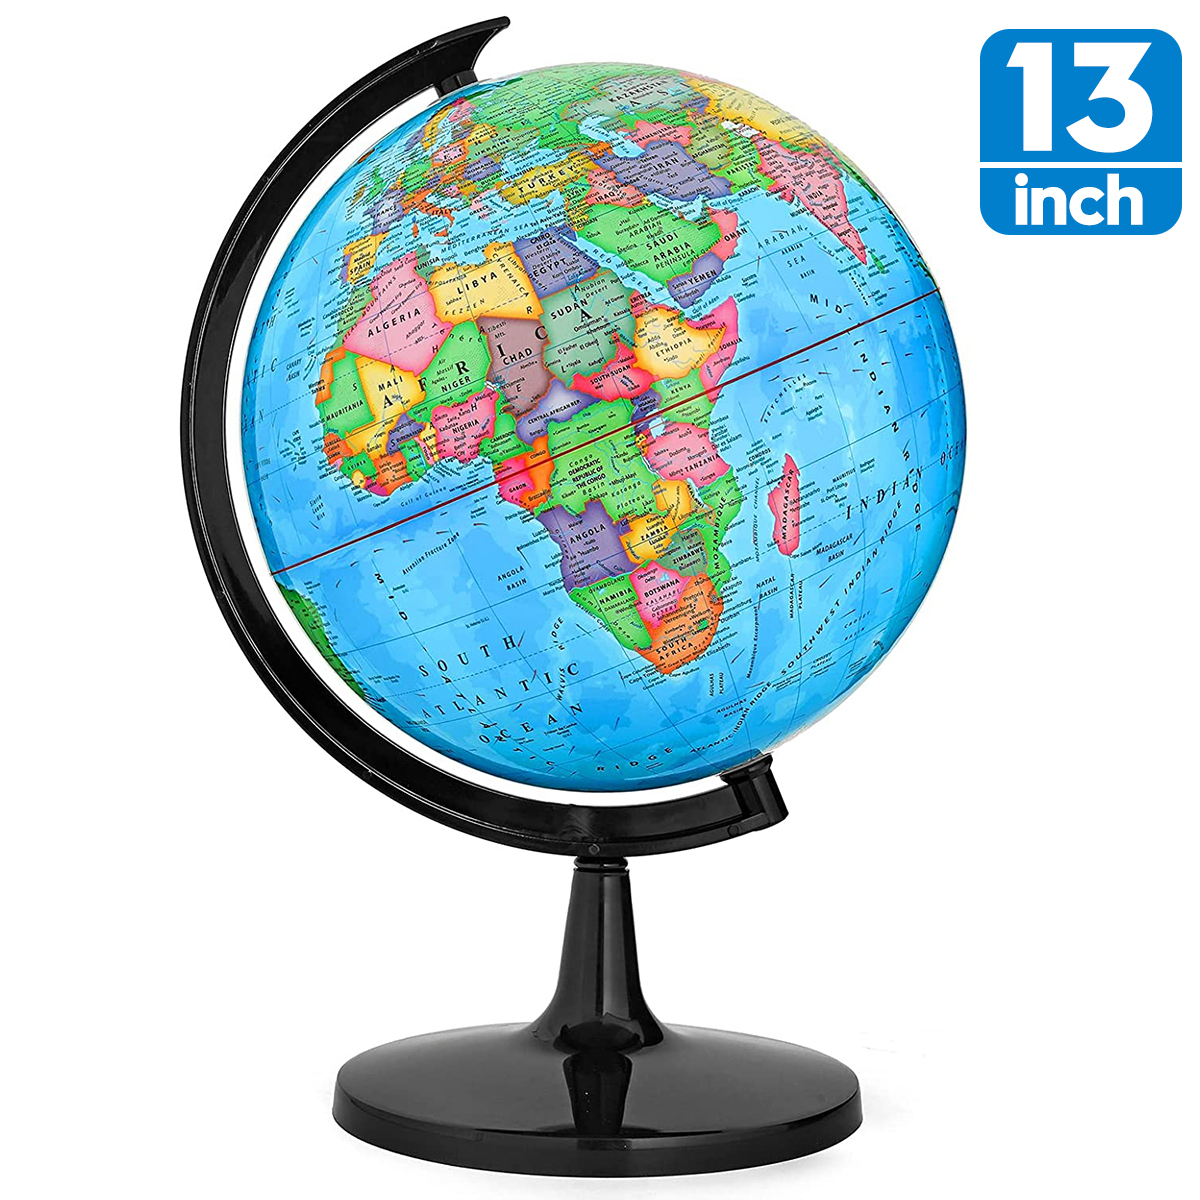 BSHAPPLUS 13" World Globe for Kids, Rotating Globes of the World with Stand, Geography Educational Toy, Home Office, Shelf Desktop, Decor Gift - image 1 of 7